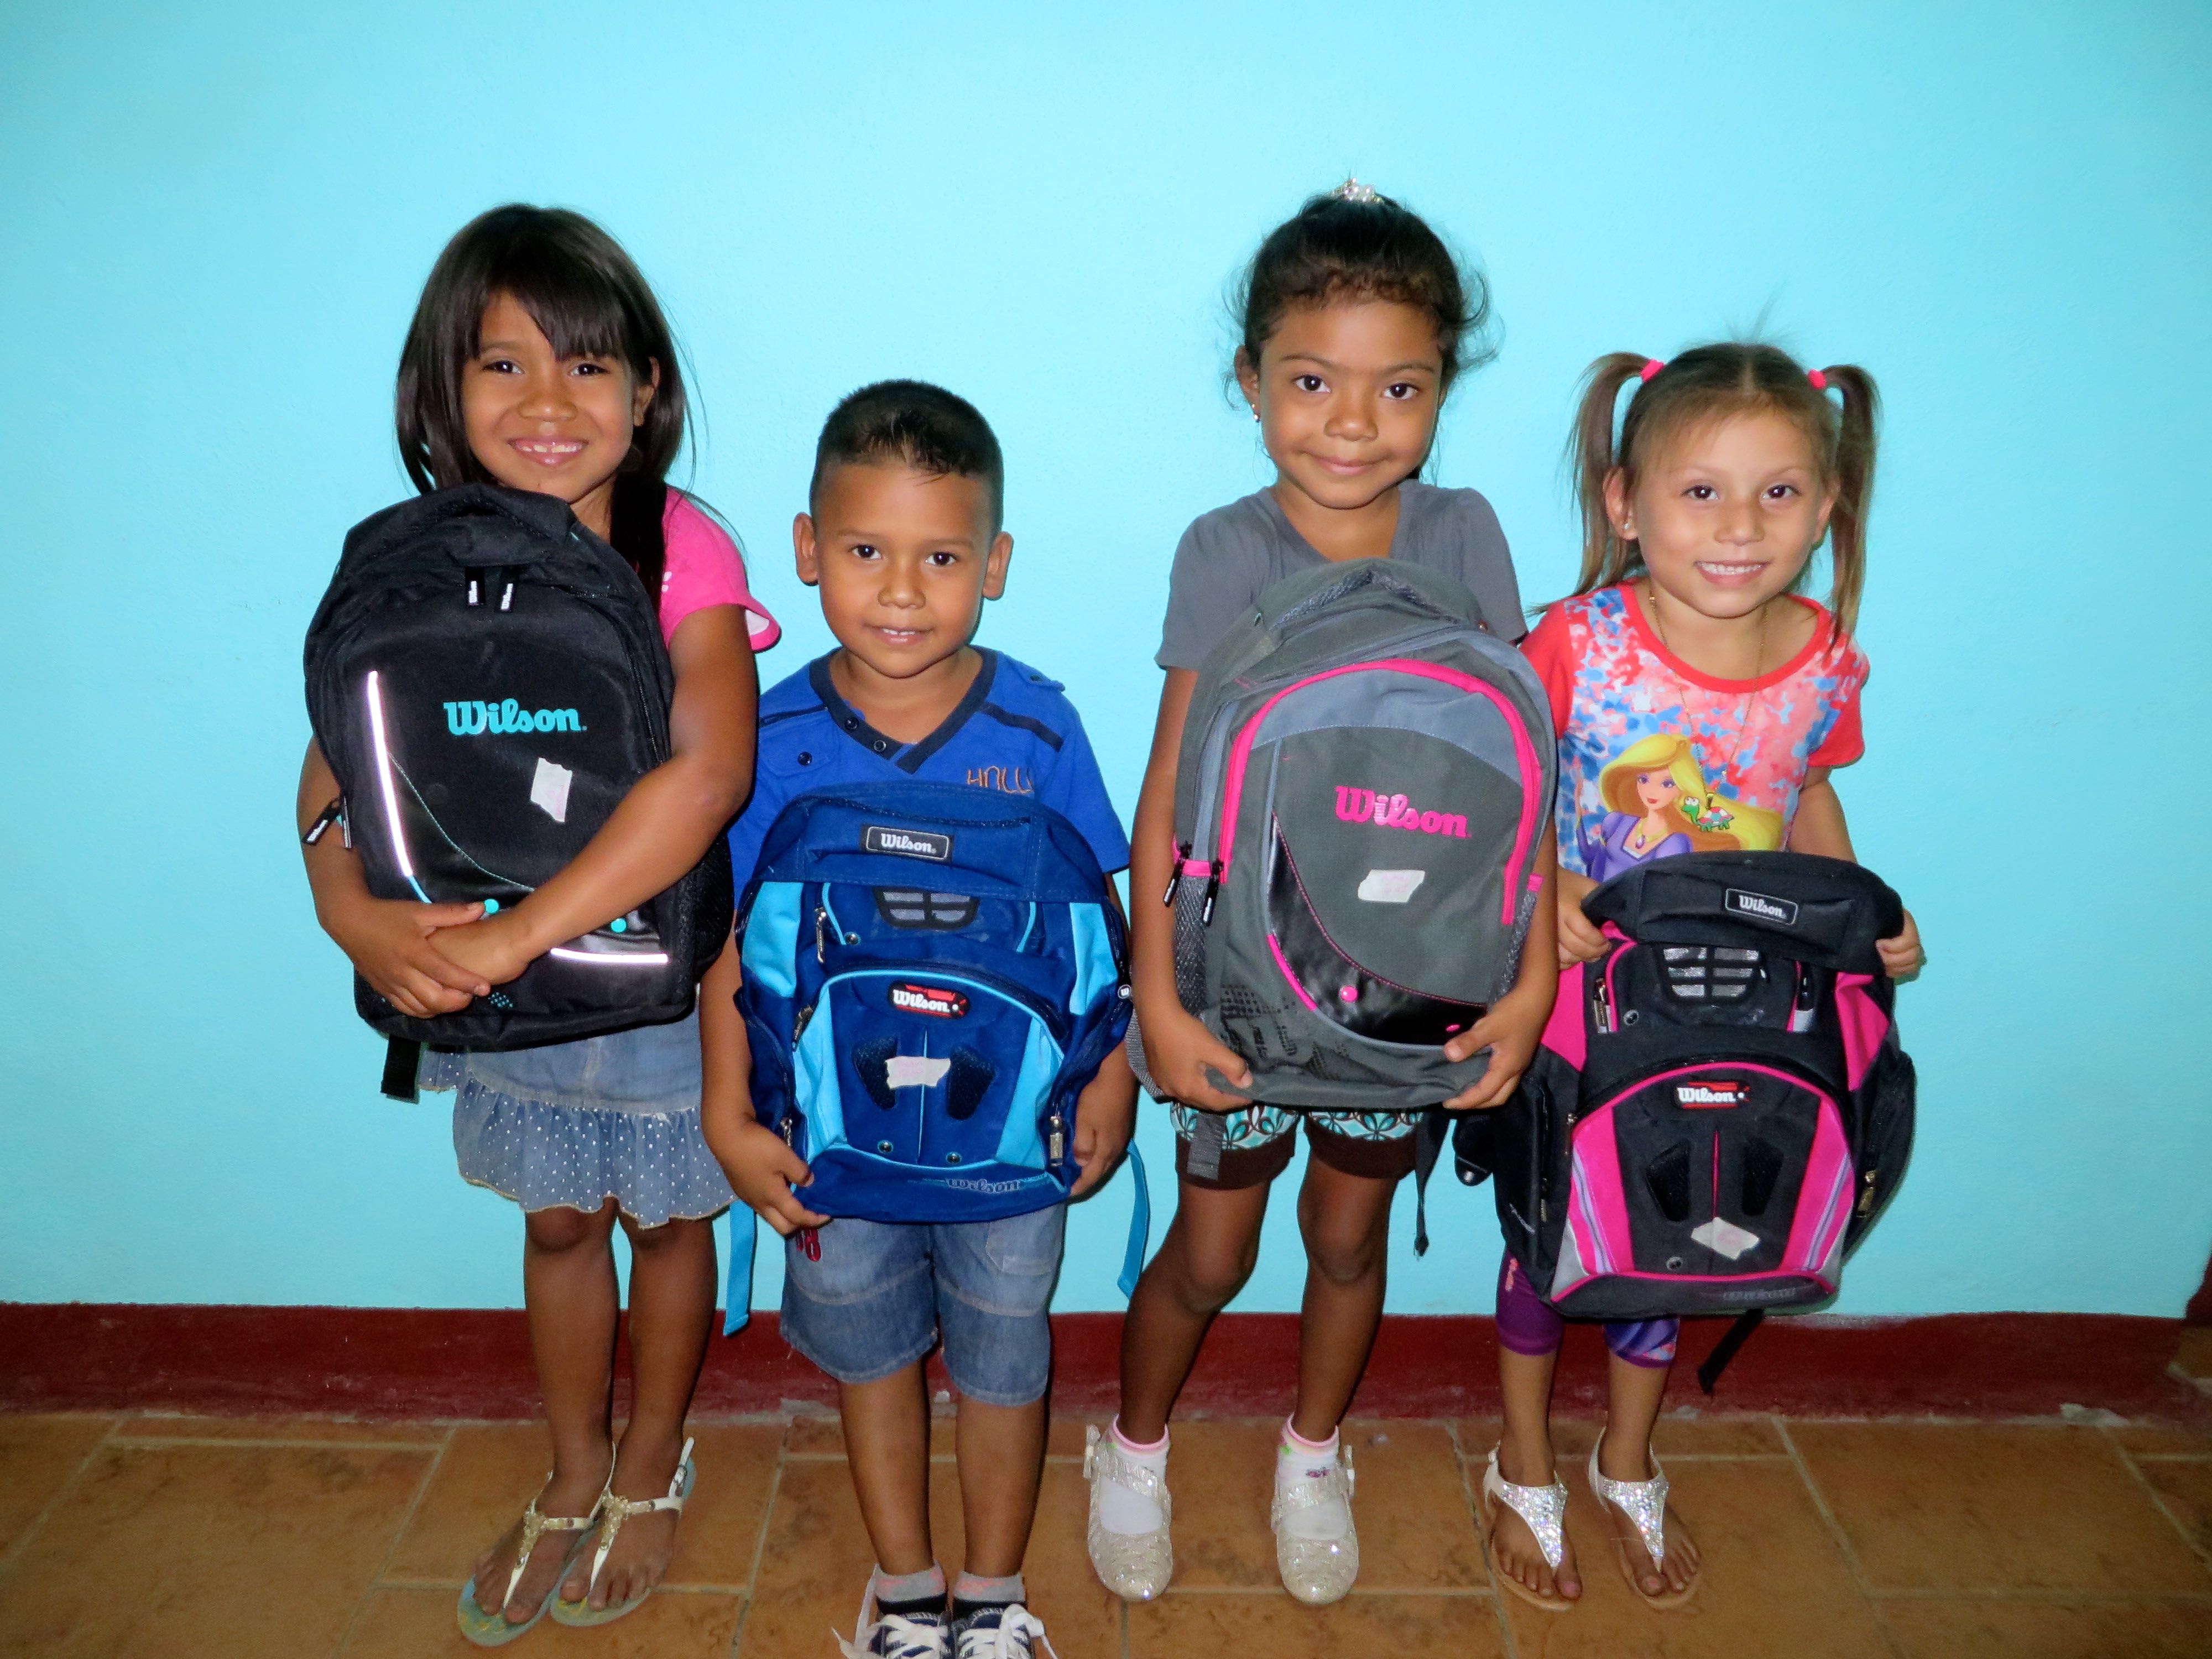 Our Candelaria first graders are excited to make the jump from preschool to elementary school this year! 